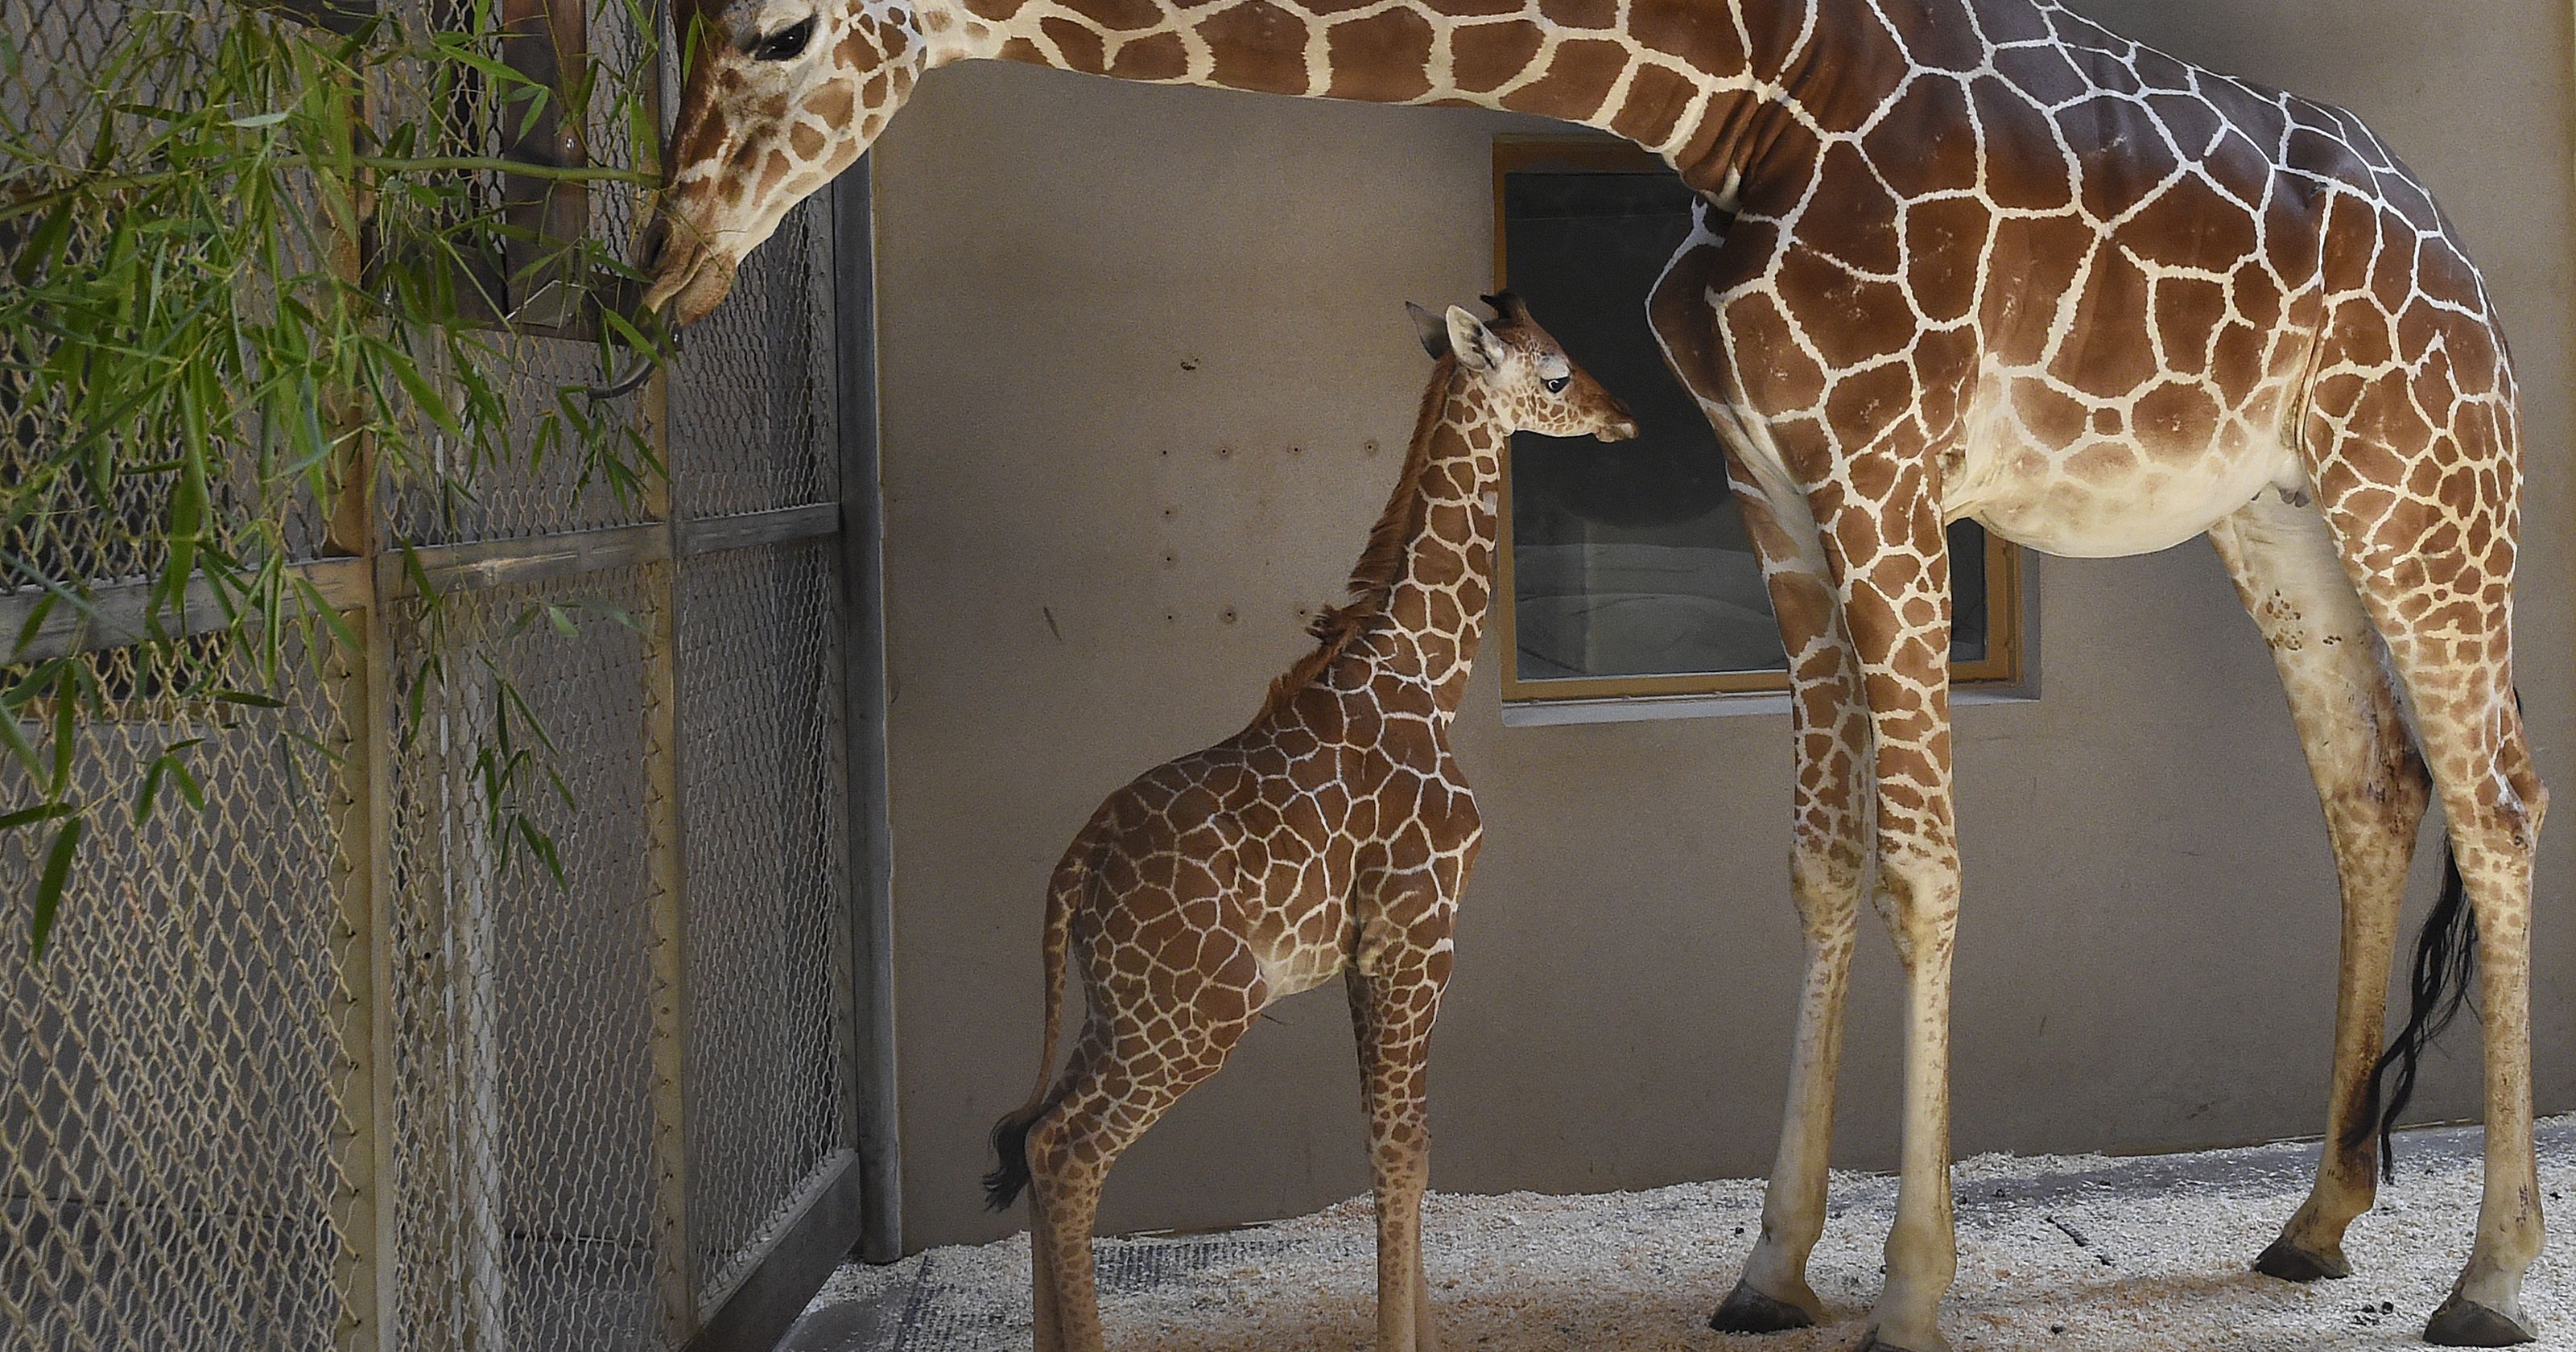 Julius the baby giraffe dies, and thousands are mourning